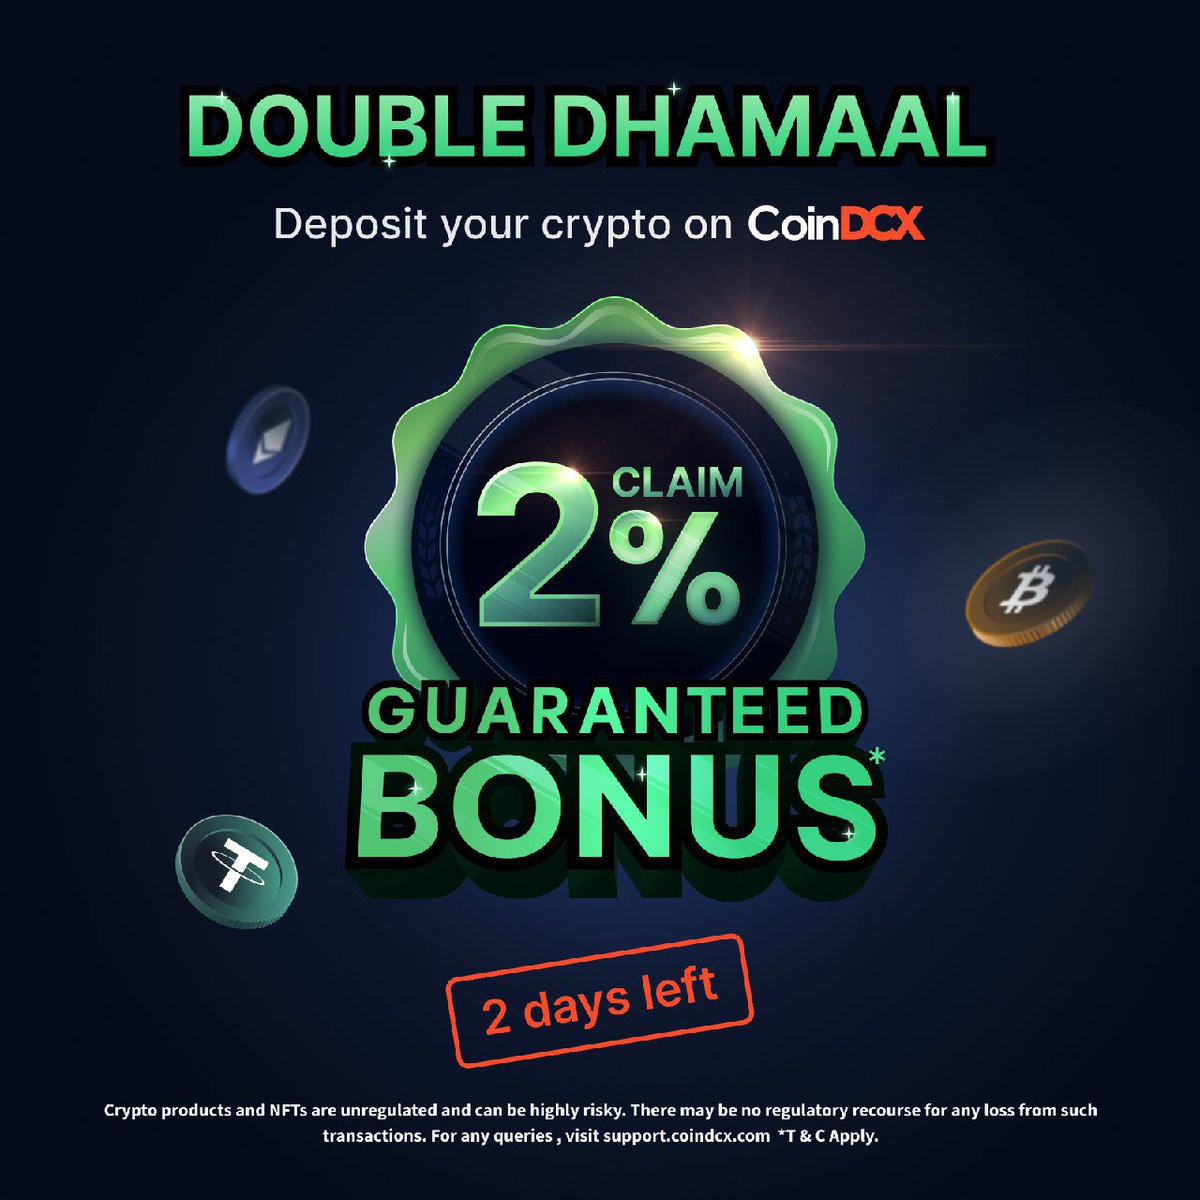 This is not a Dhamaal🤩🤩
it is a #DoubleDhamaal 😁😁

Now you have got a great opportunity to make guaranteed 2% on your deposit in CoinDCX exchange ❤️

I am inviting you to deposit crypto on the safe and compliant CoinDCX platform. Additionally, get a 2% guaranteed bonus on